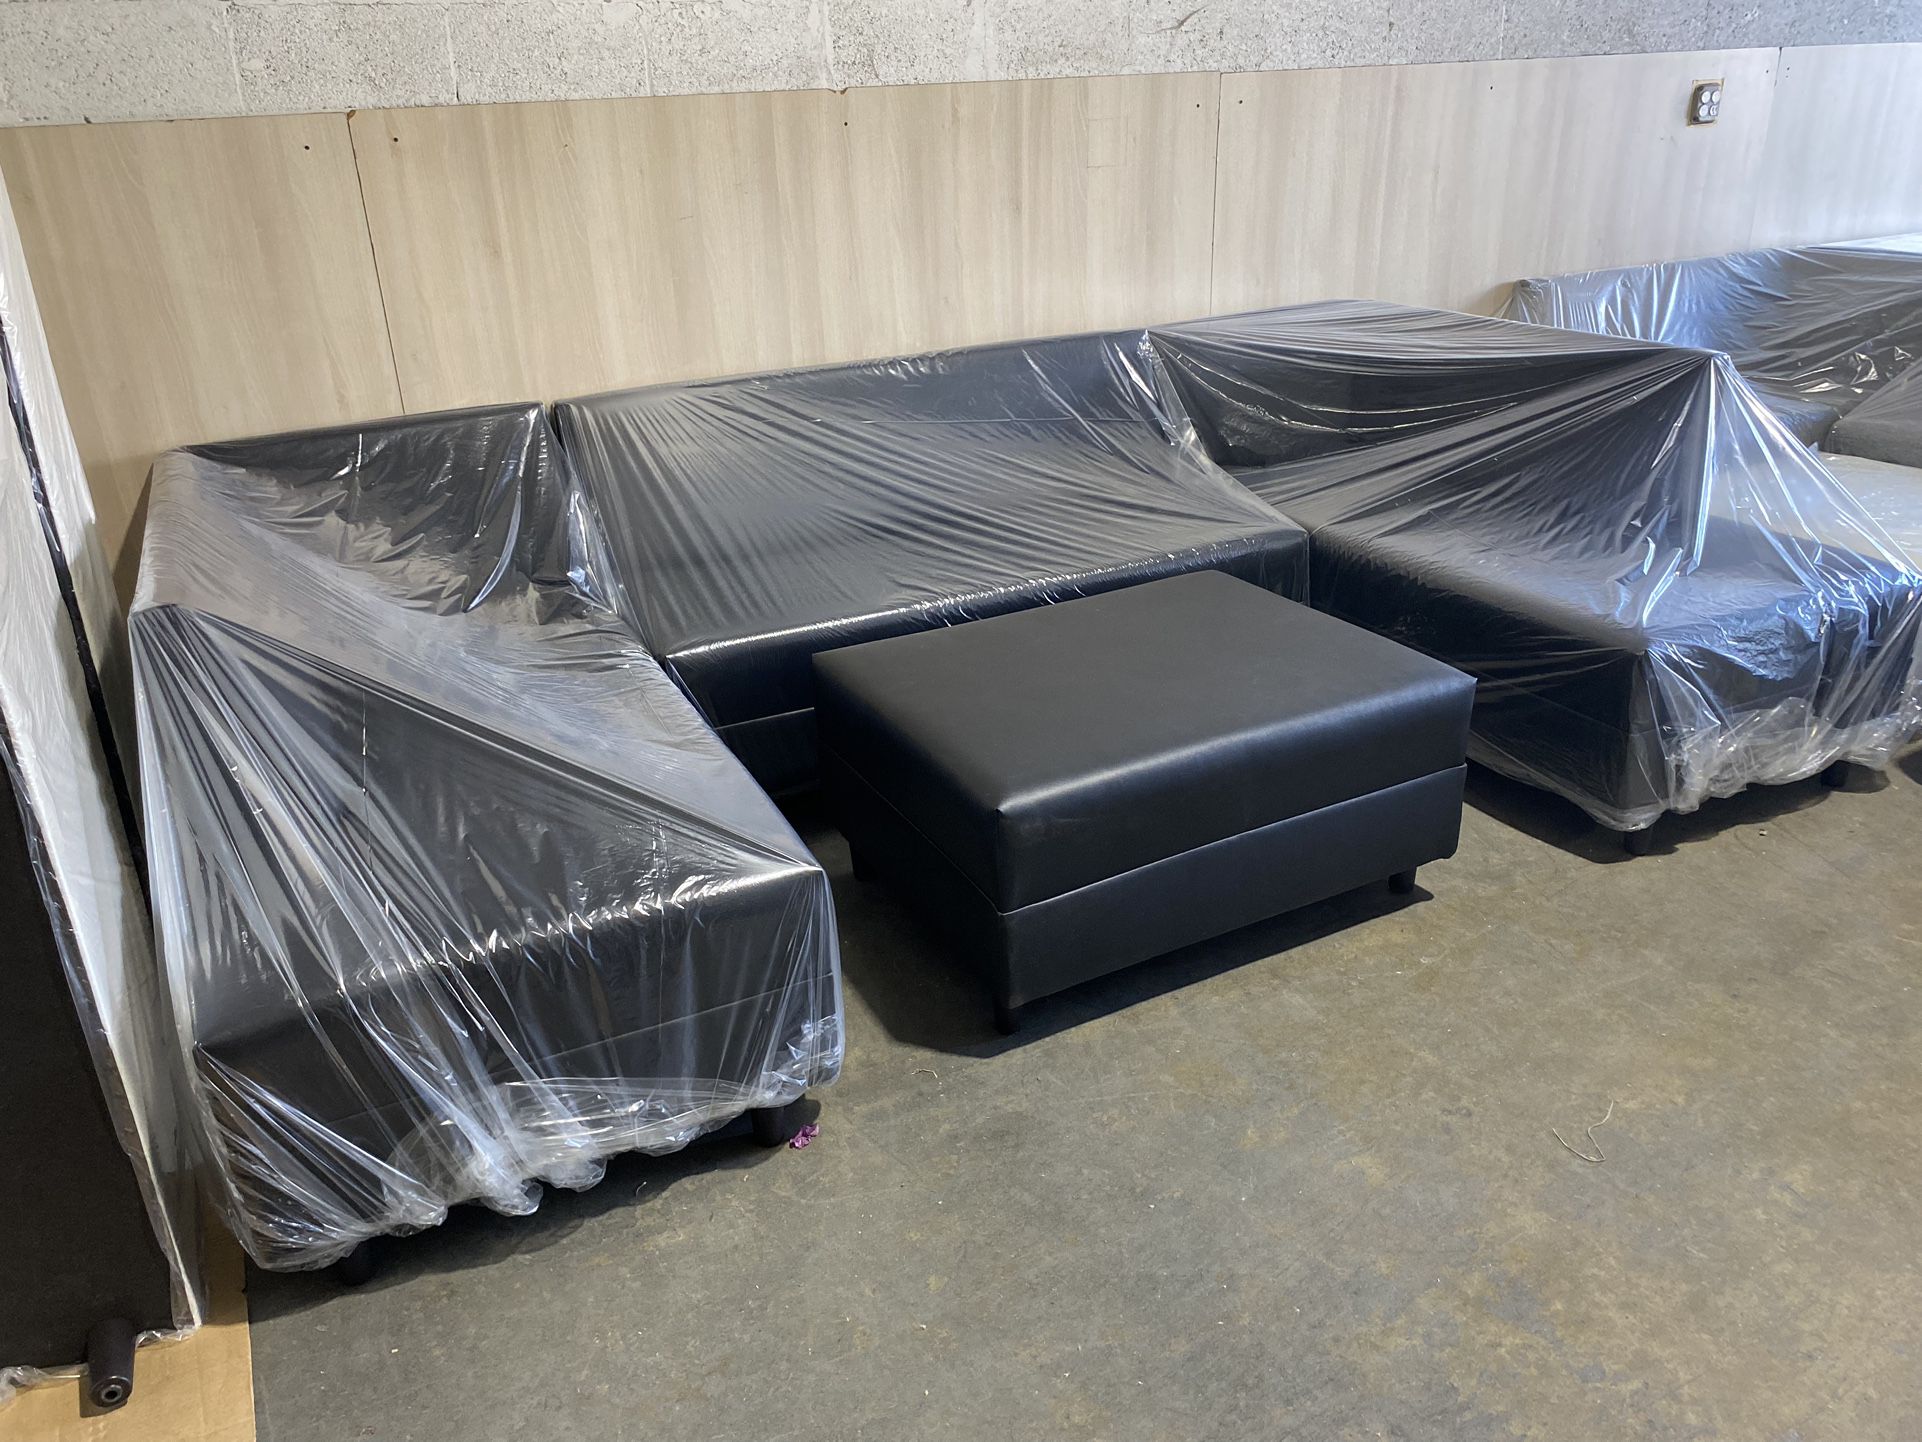 Black Sectional Sofa Never Used 